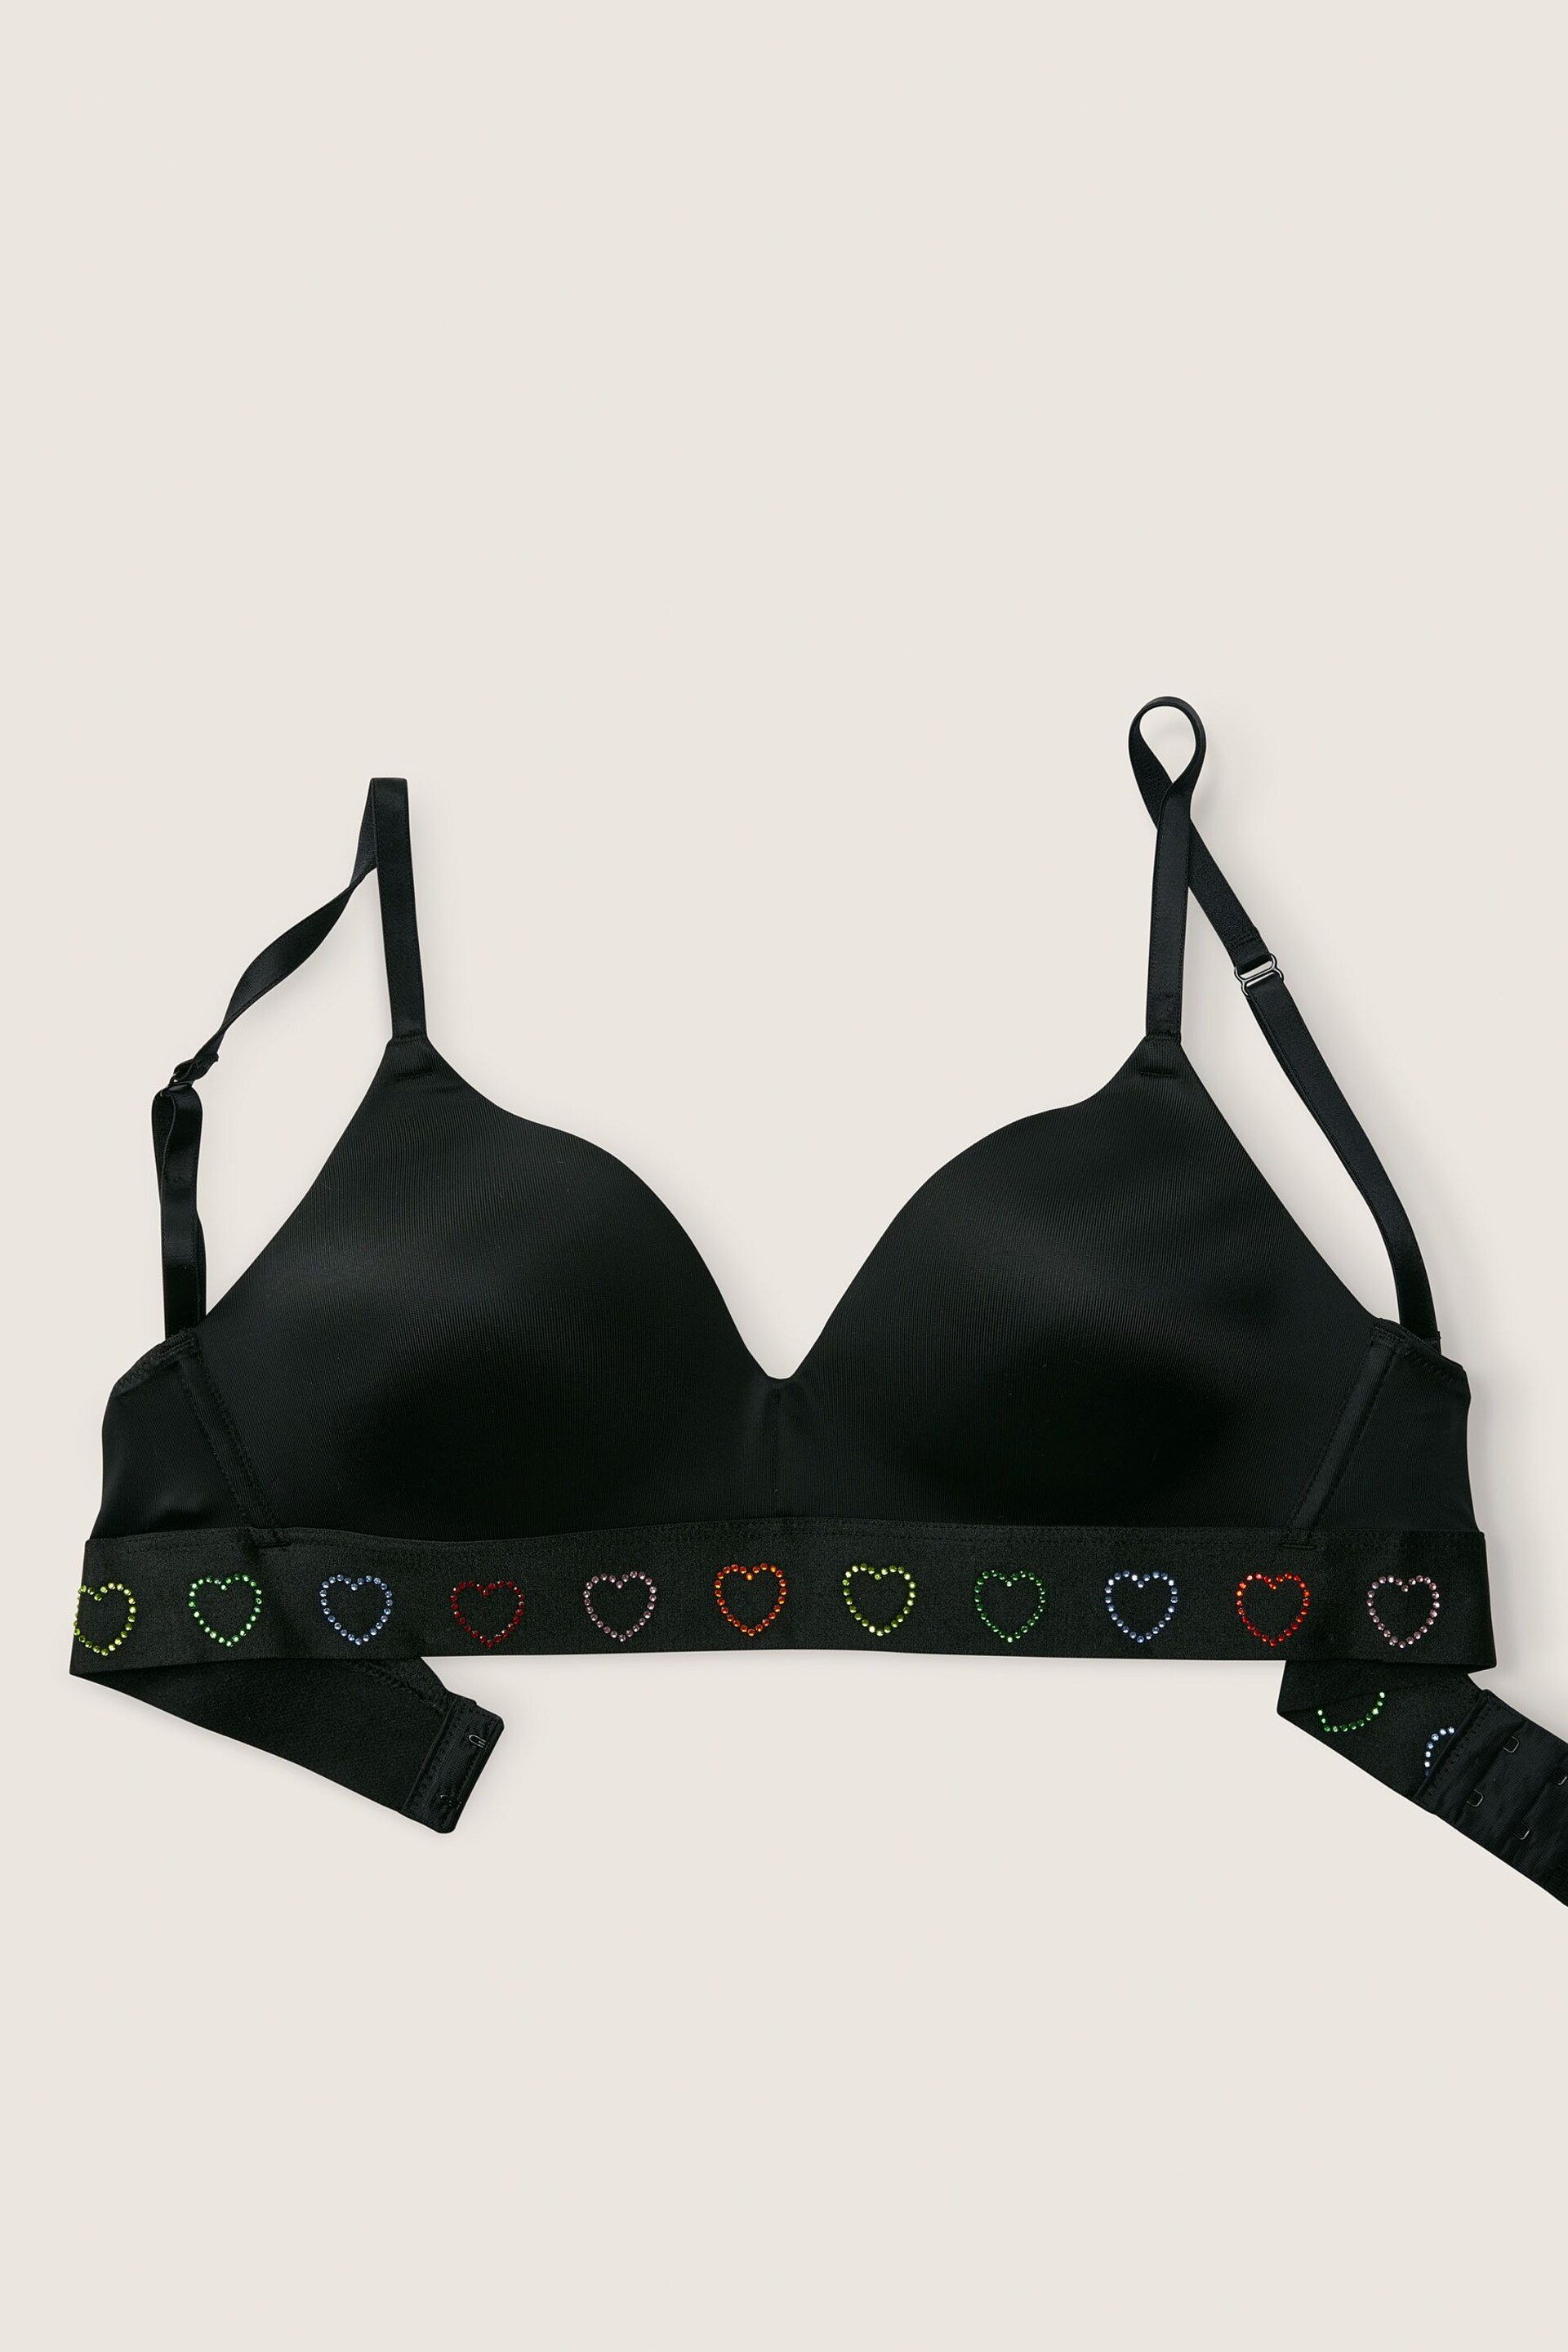 Victoria's Secret PINK Pure Black Rainbow Diamante Non Wired Lightly Lined Smooth T-Shirt Bra - Image 3 of 5